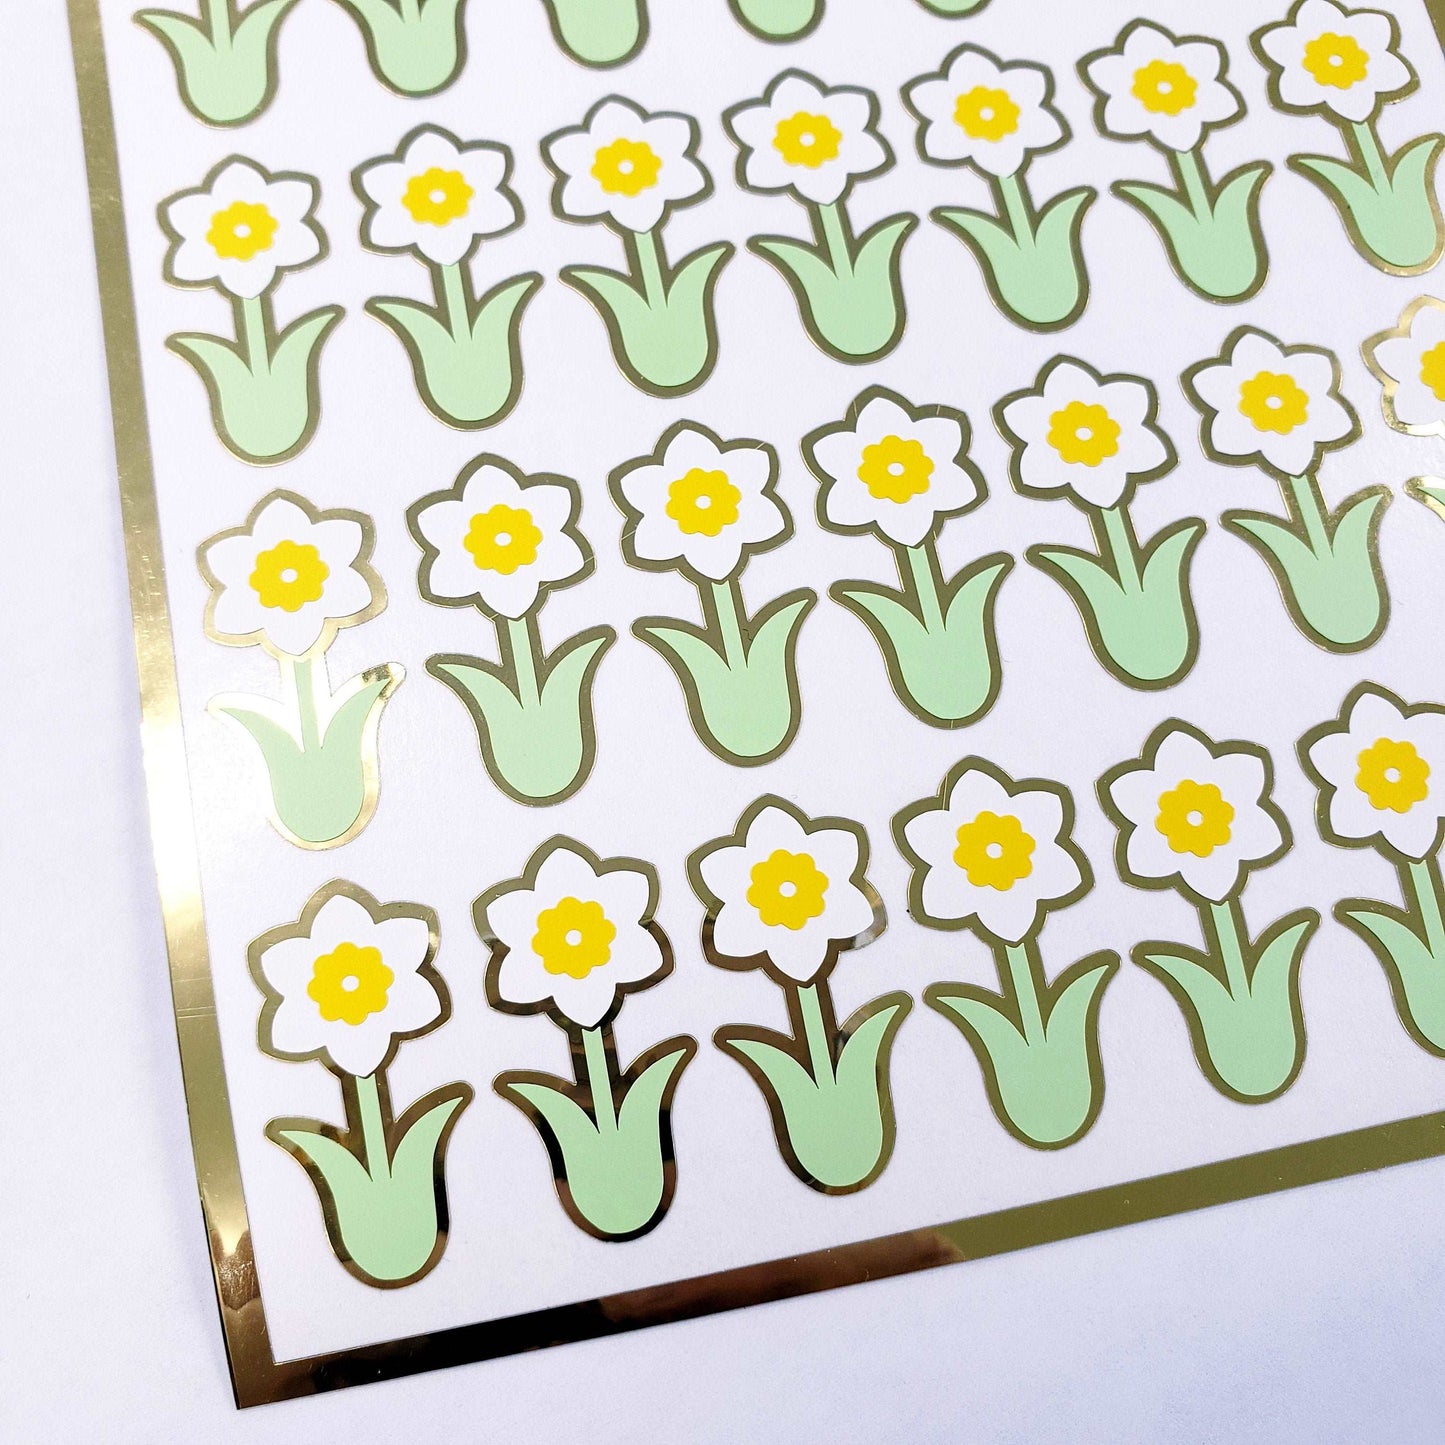 Daffodil Stickers, set of 35 flower decals for Easter, Mother's Day, Spring weddings, sticker gift for gardeners, waterproof peel and stick.